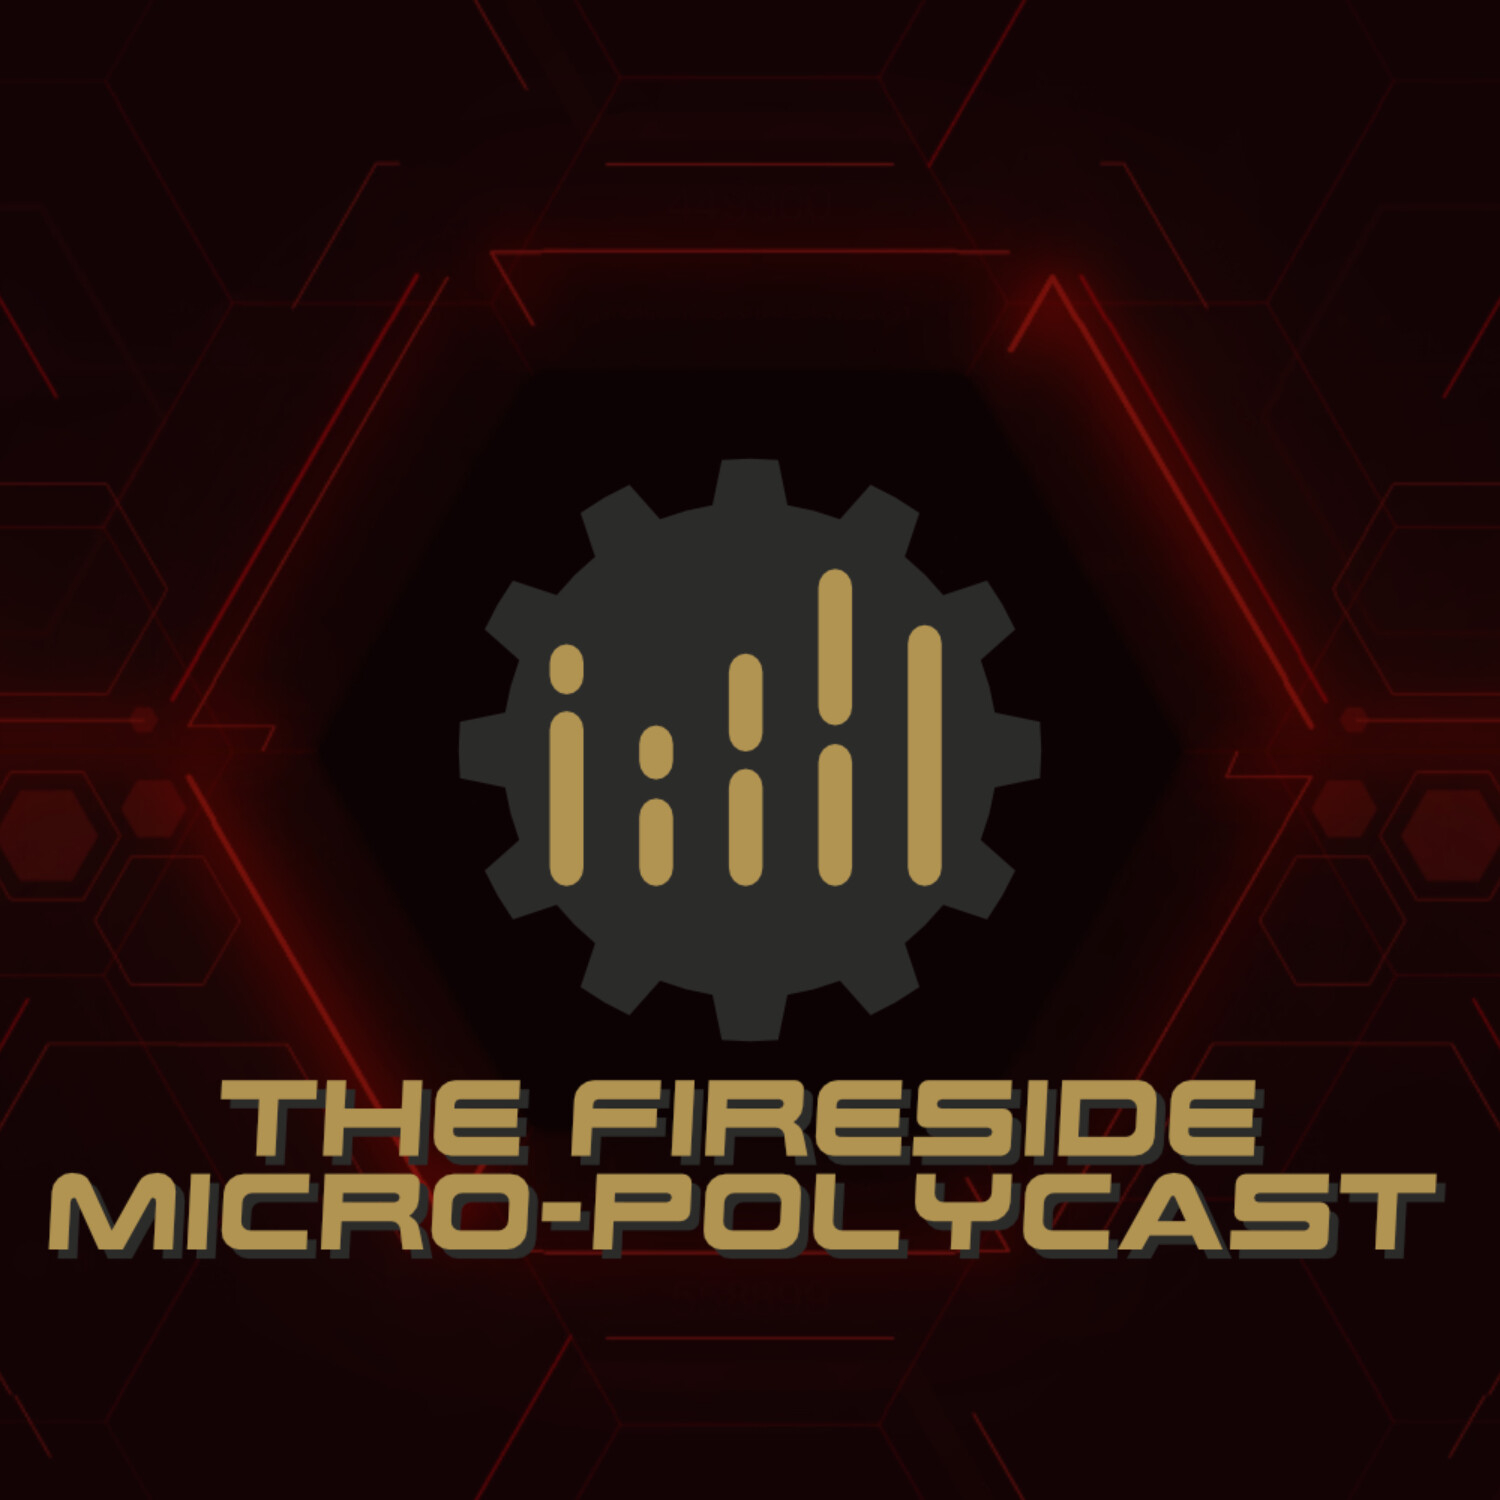 Future of the Phases #FiresidePolyCast